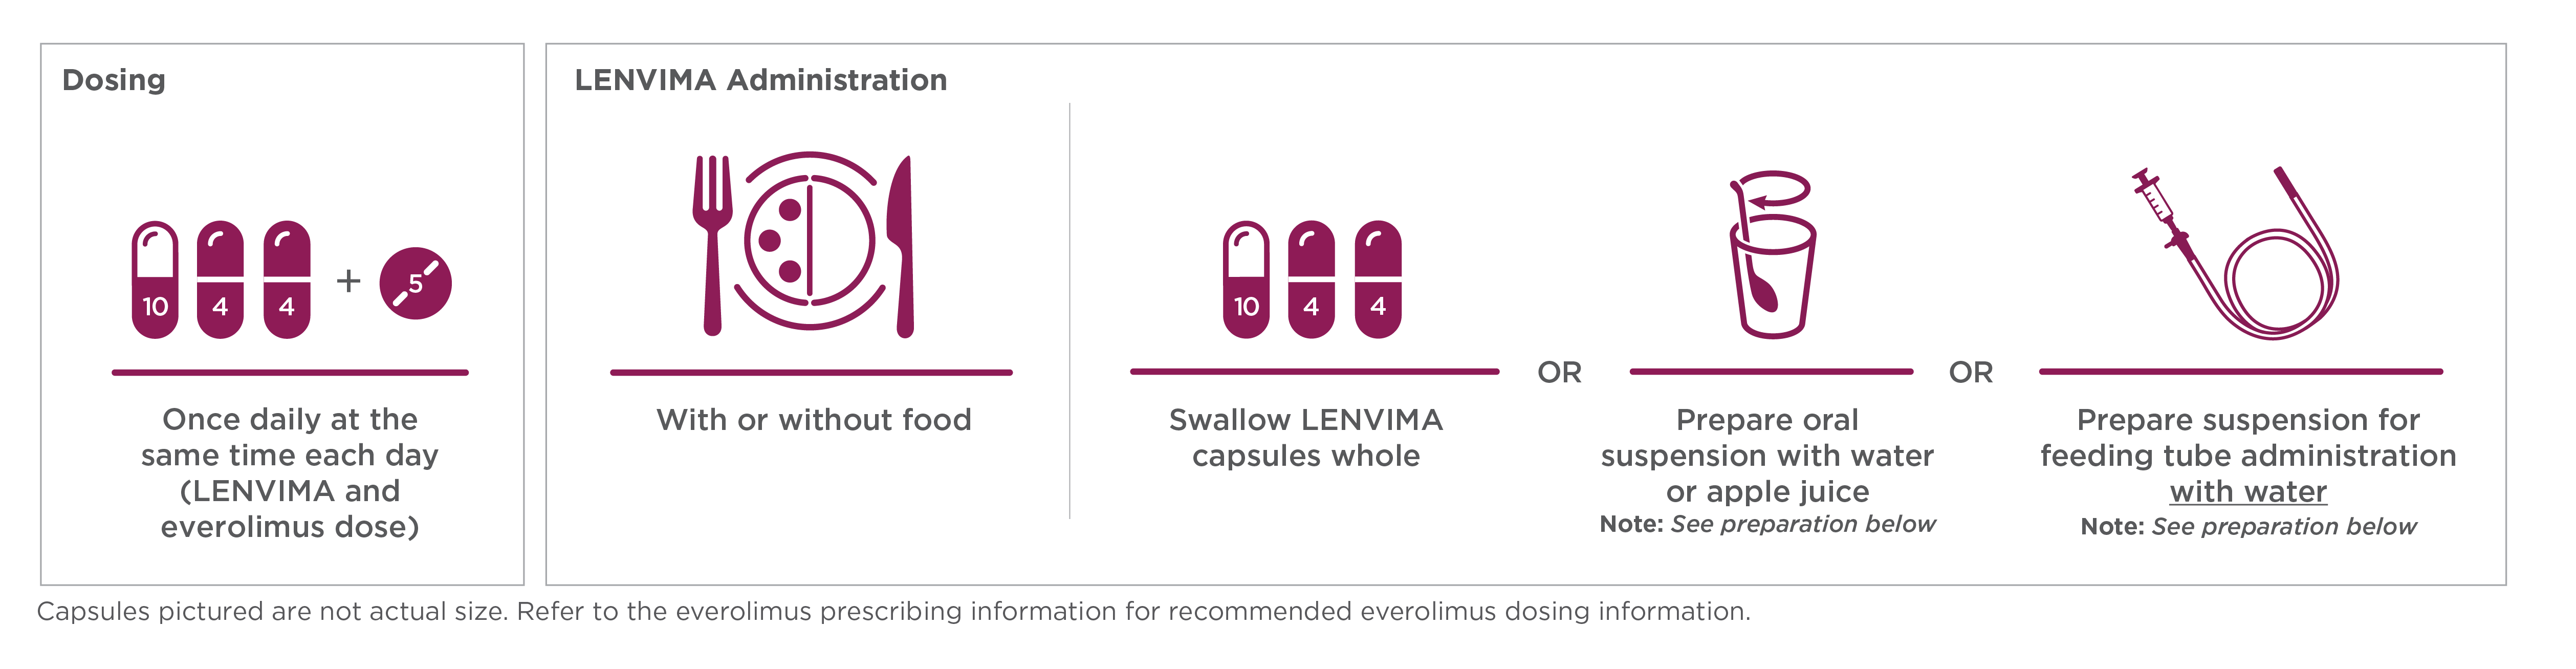 LENVIMA dosing for advanced RCC is once a day, every day, with or without food graphic